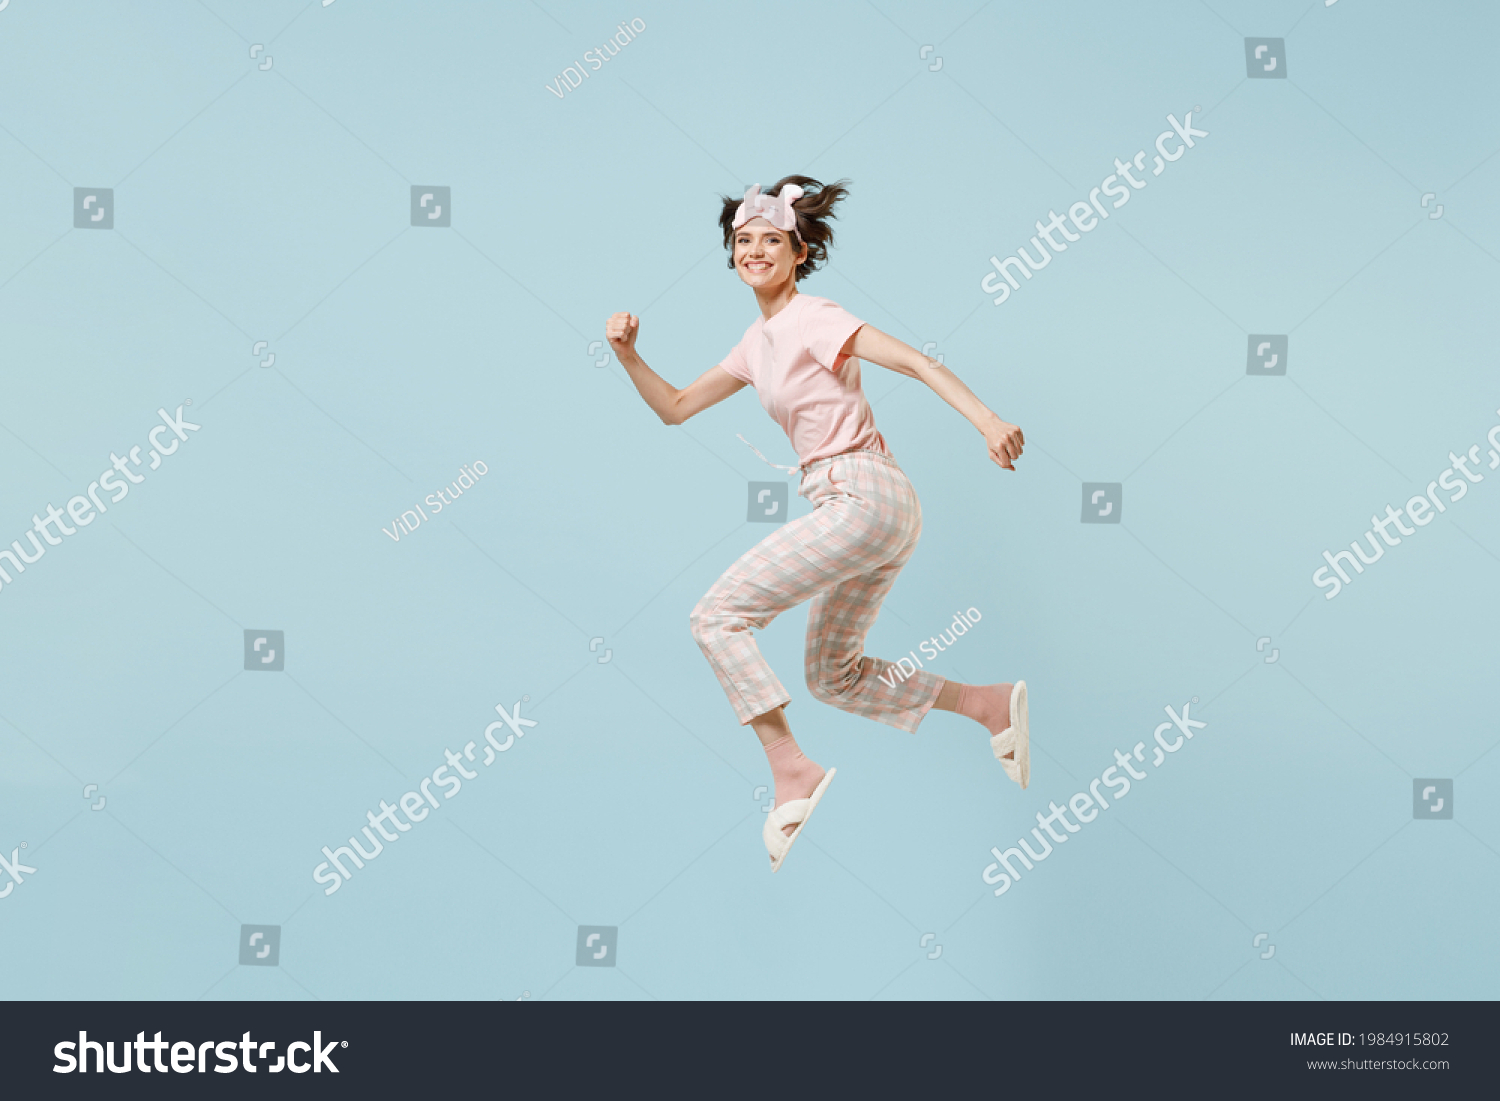 13,251 Girl in night suit Stock Photos, Images & Photography | Shutterstock